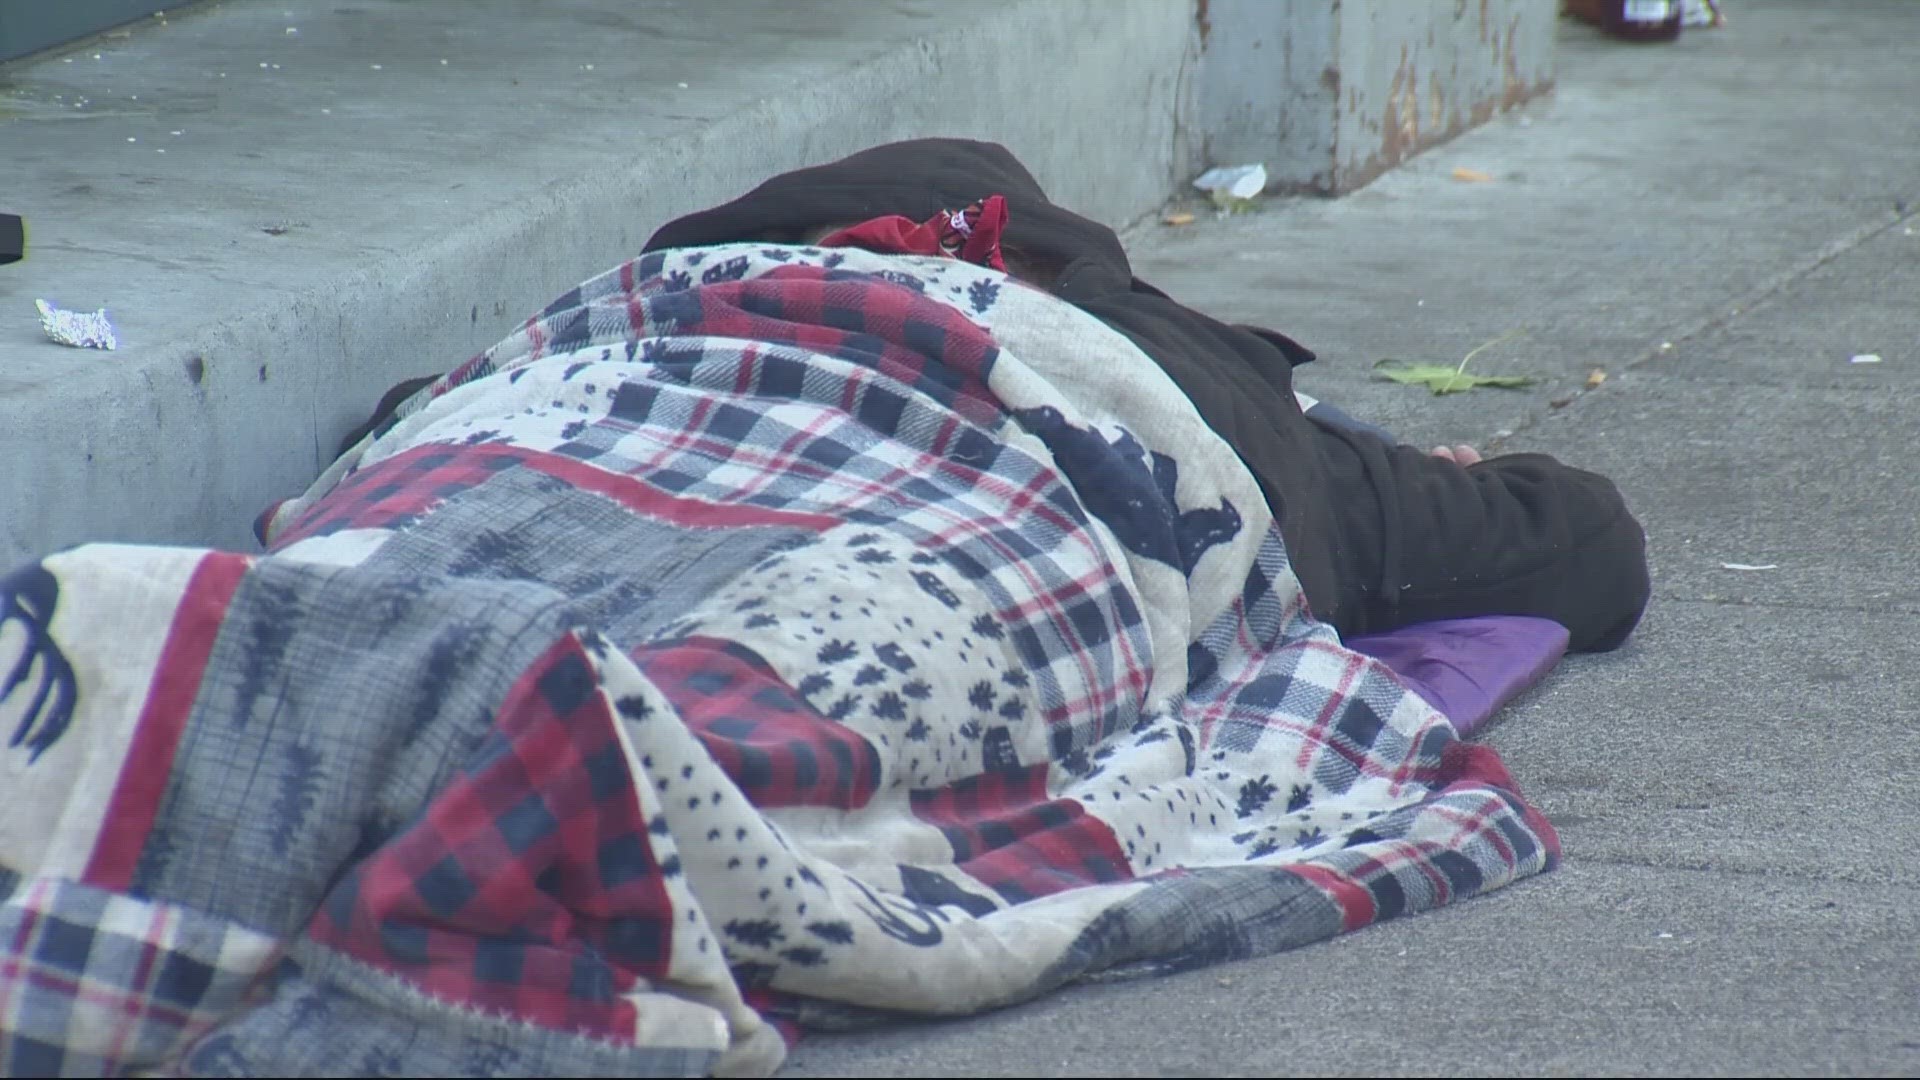 The emergency order will push efforts to address the homelessness crisis and behavior health needs in Multnomah County.